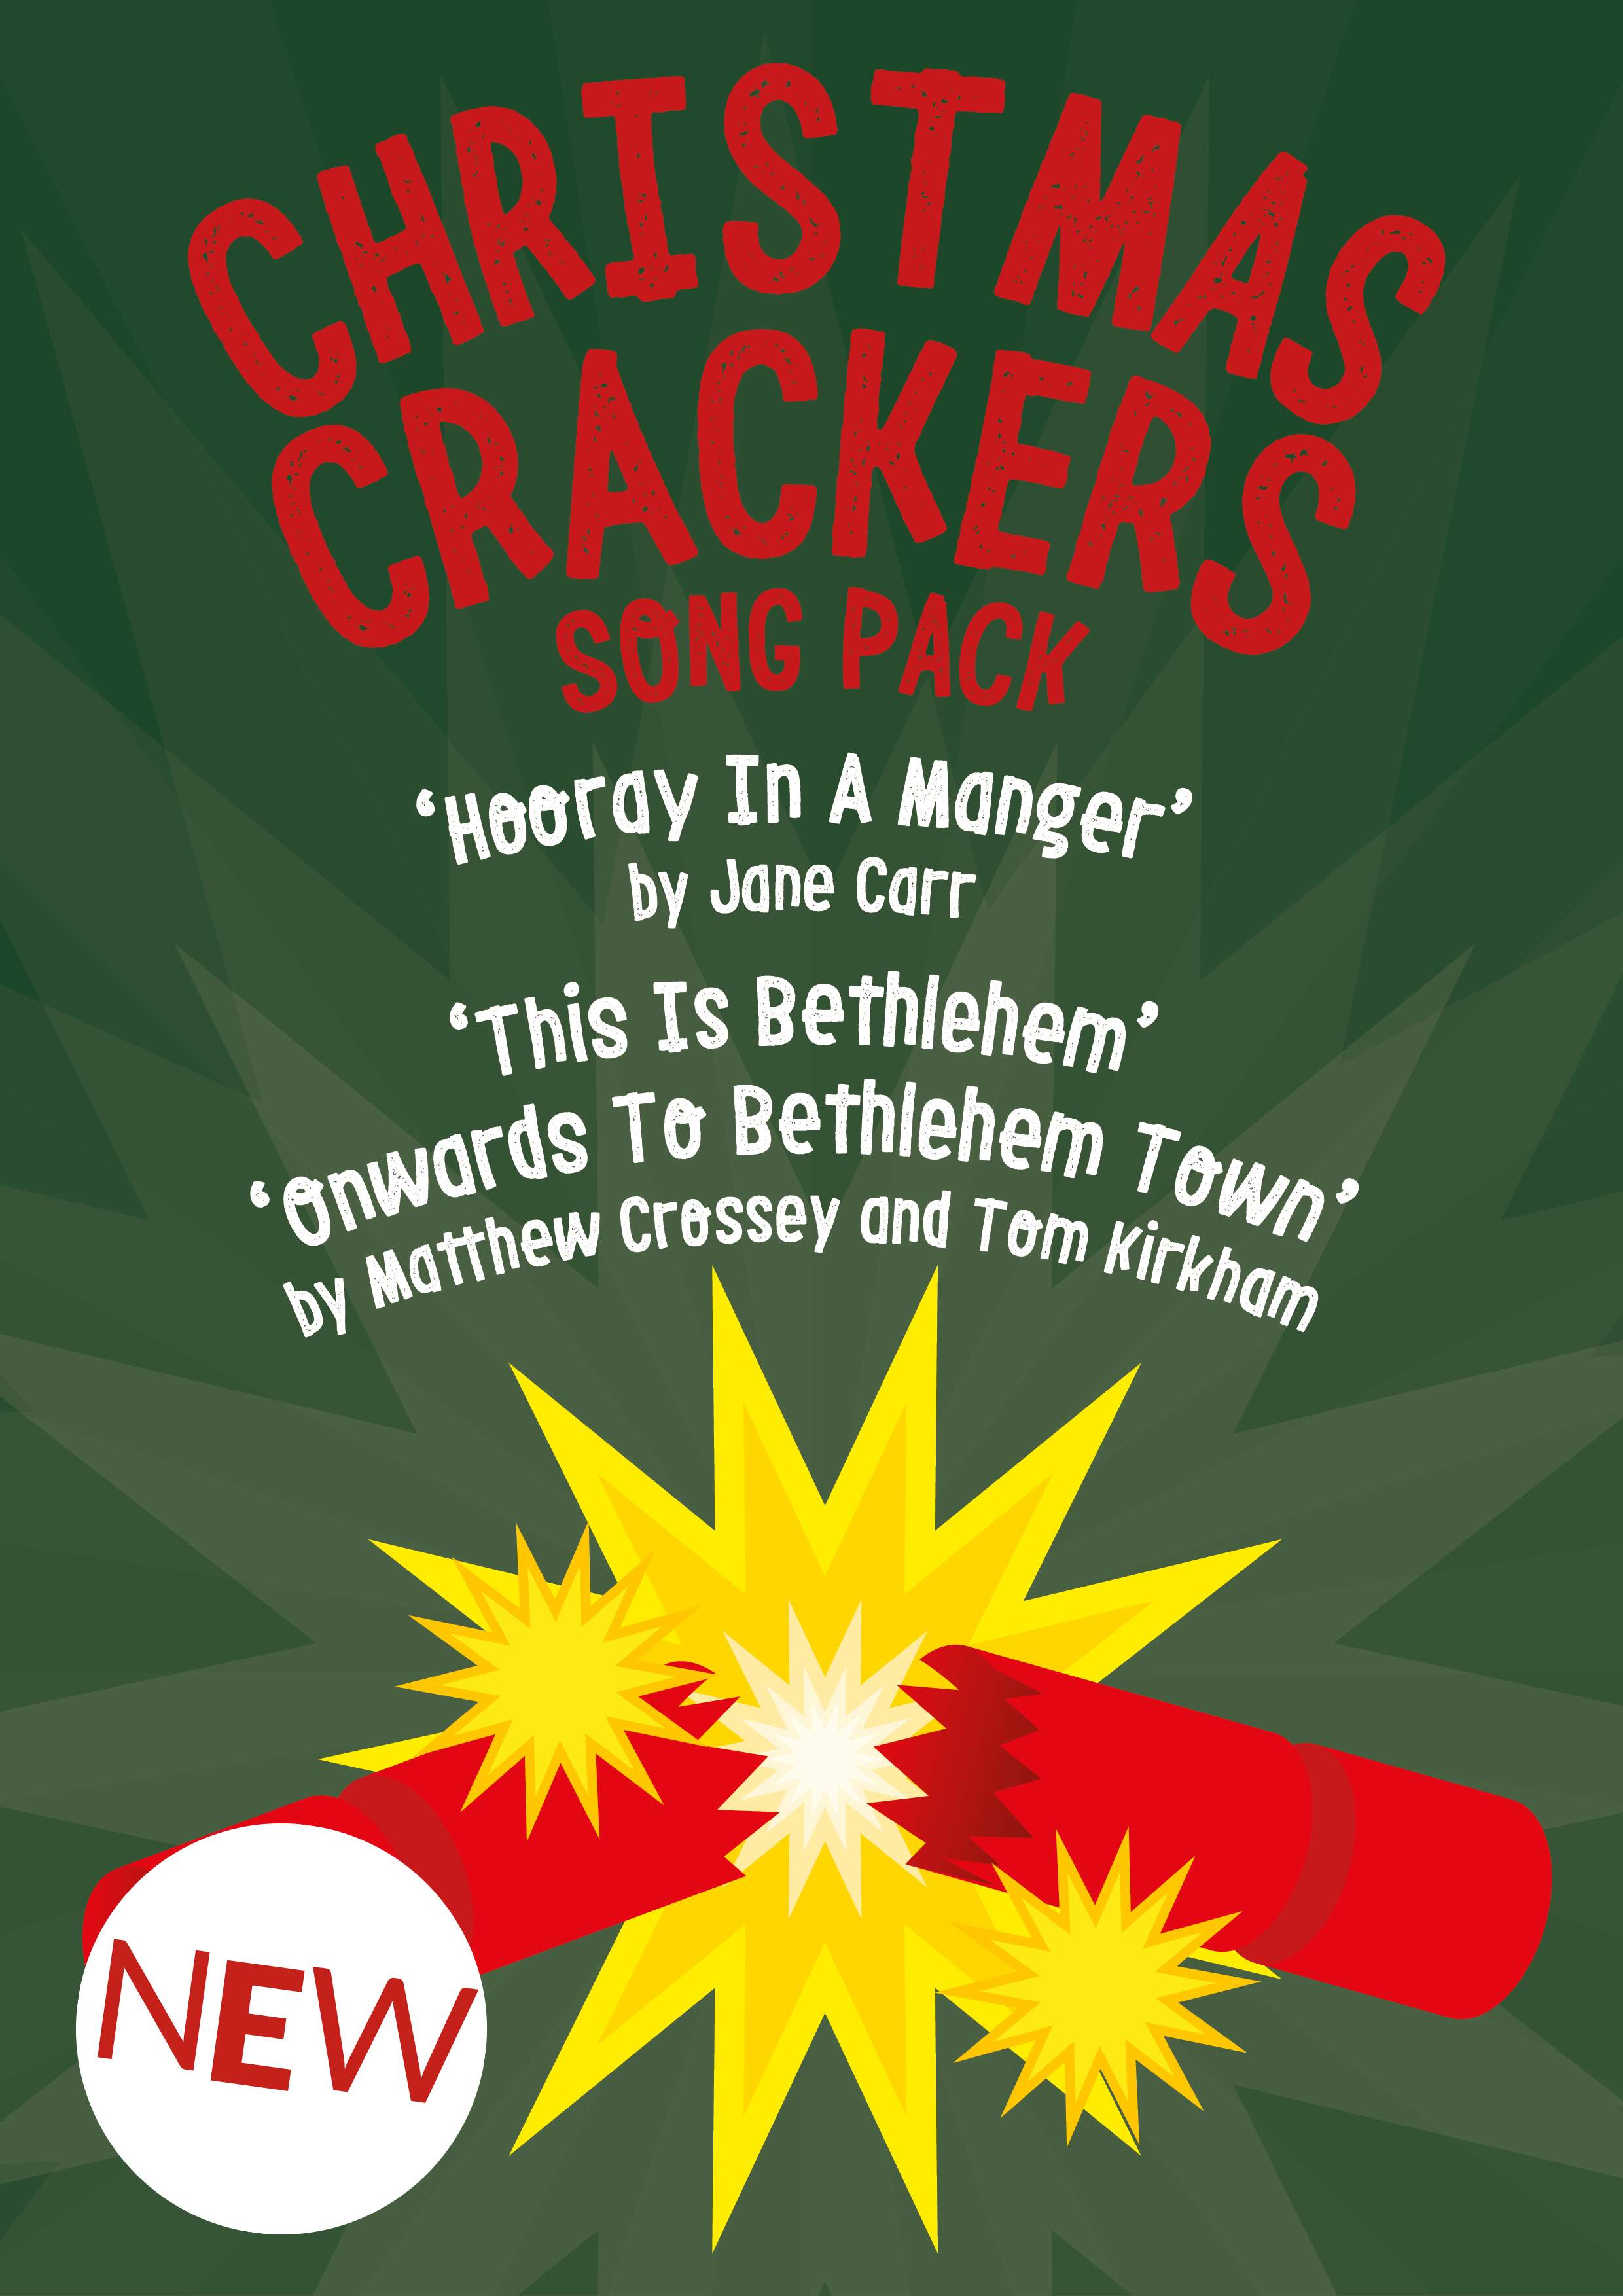 Christmas Crackers Song Pack - Free With Discount Code 'CRACKERS'